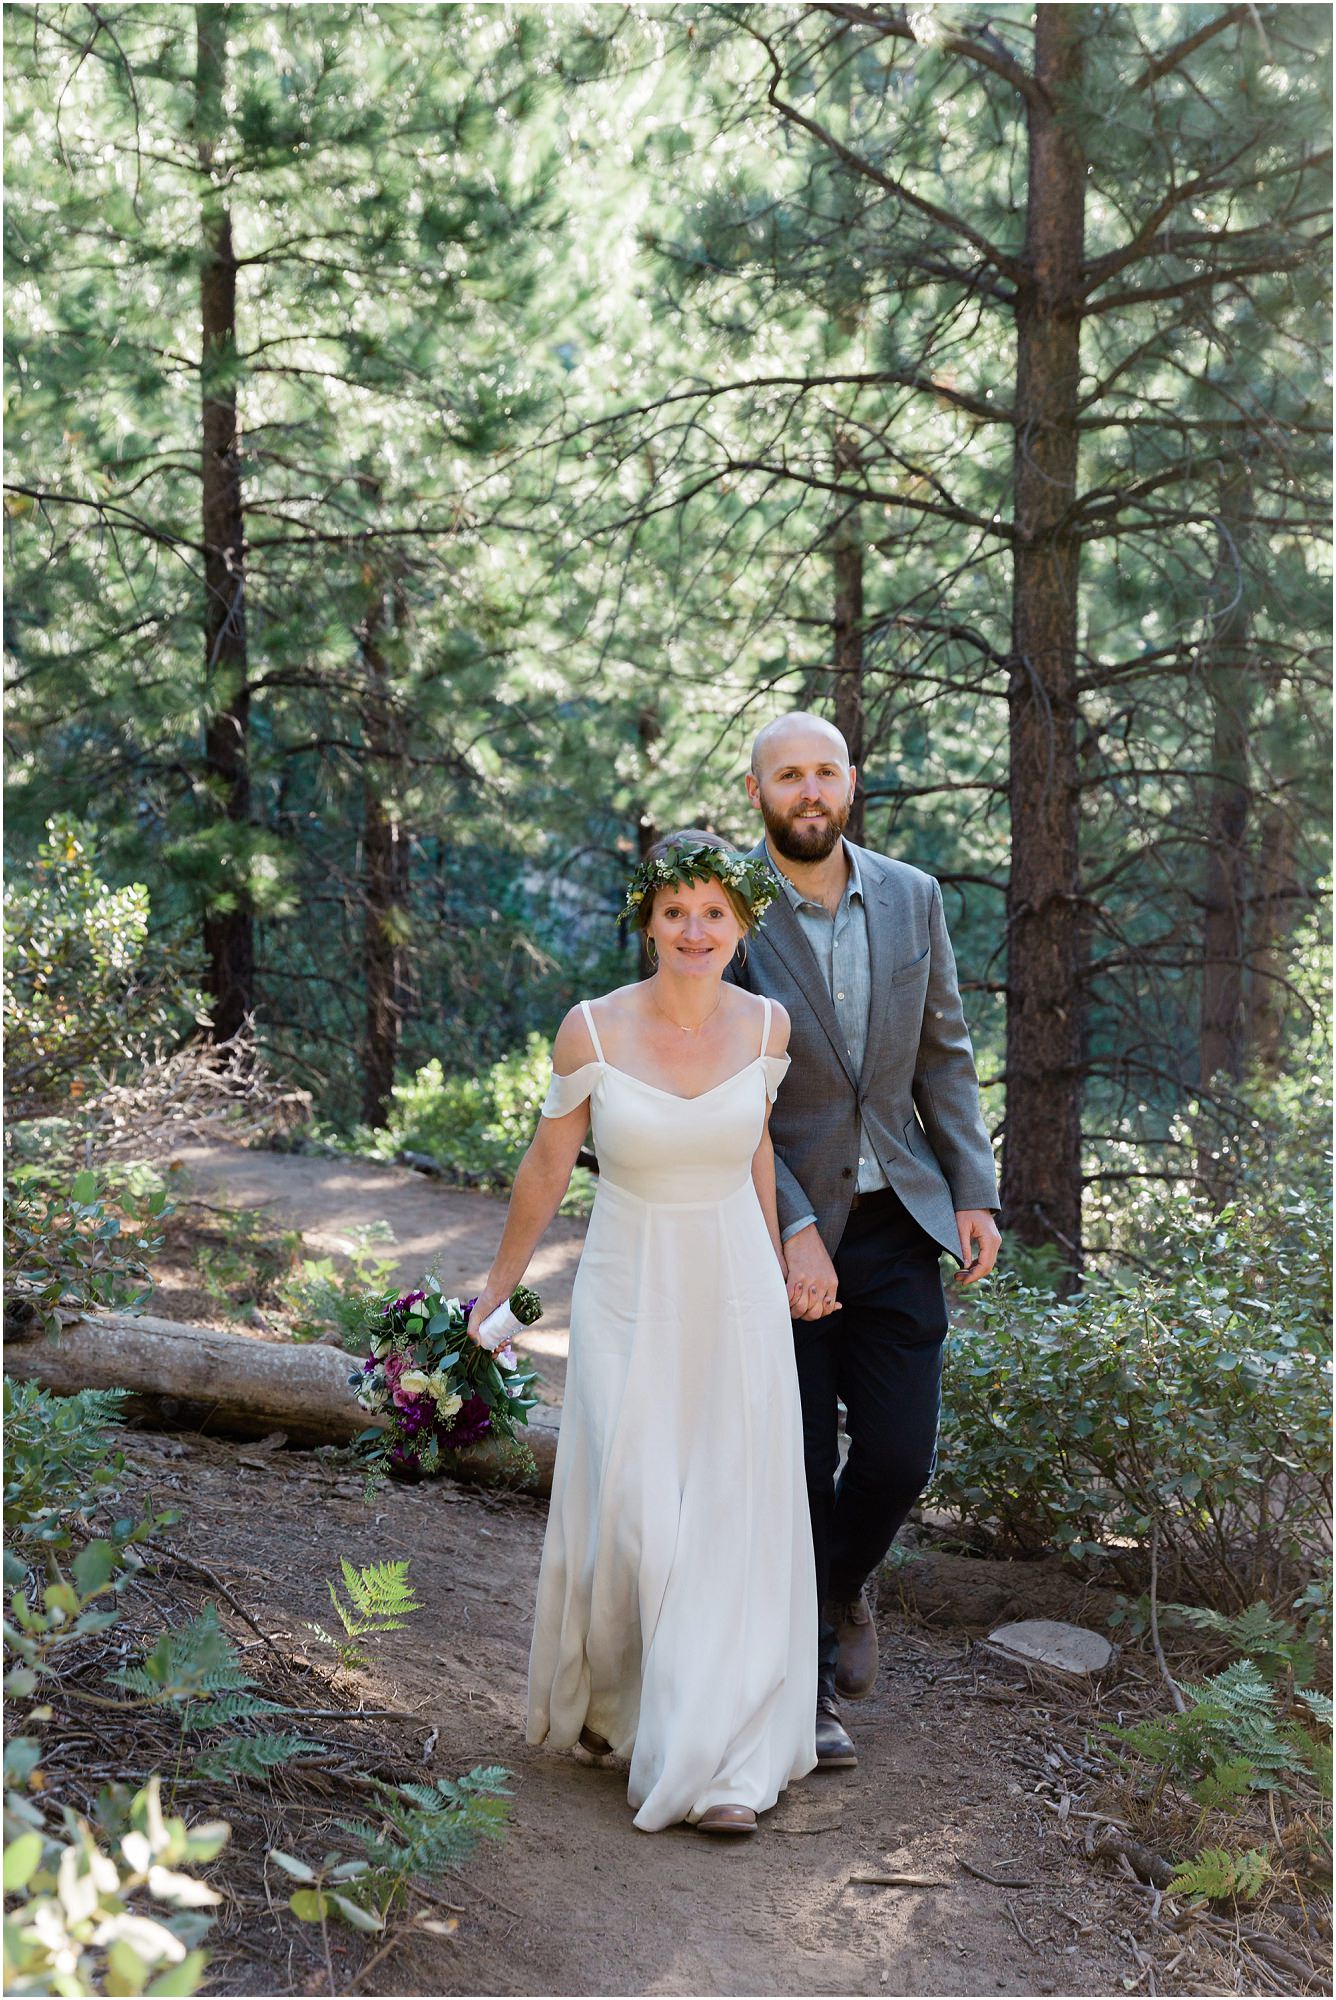 A beautiful bride wearing a white Reformation flutter sleeve dress leads her groom, dressed in navy, down the trail for portraits of their Tumalo Falls elopement in Bend, Oregon. | Erica Swantek Photography